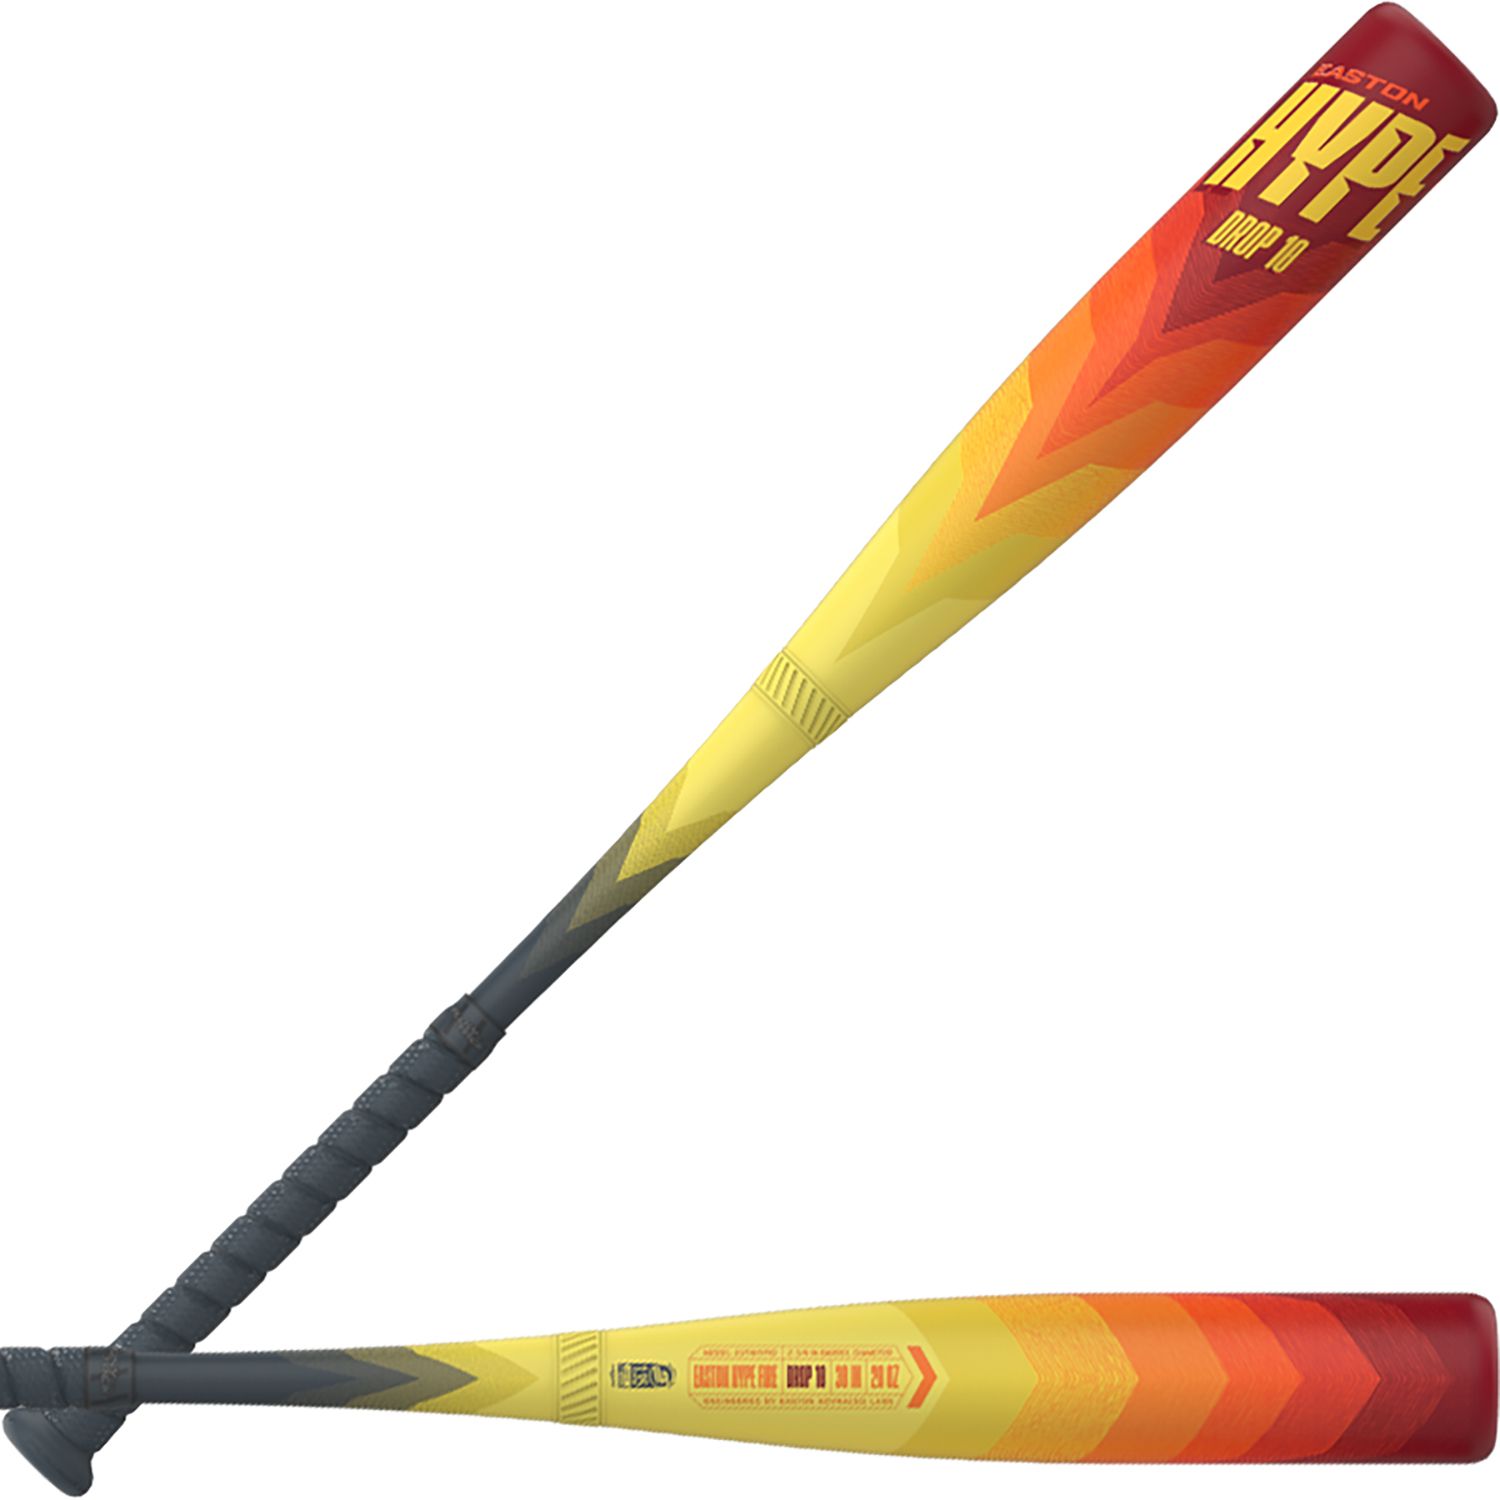 The Best USSSA Bats of The Year